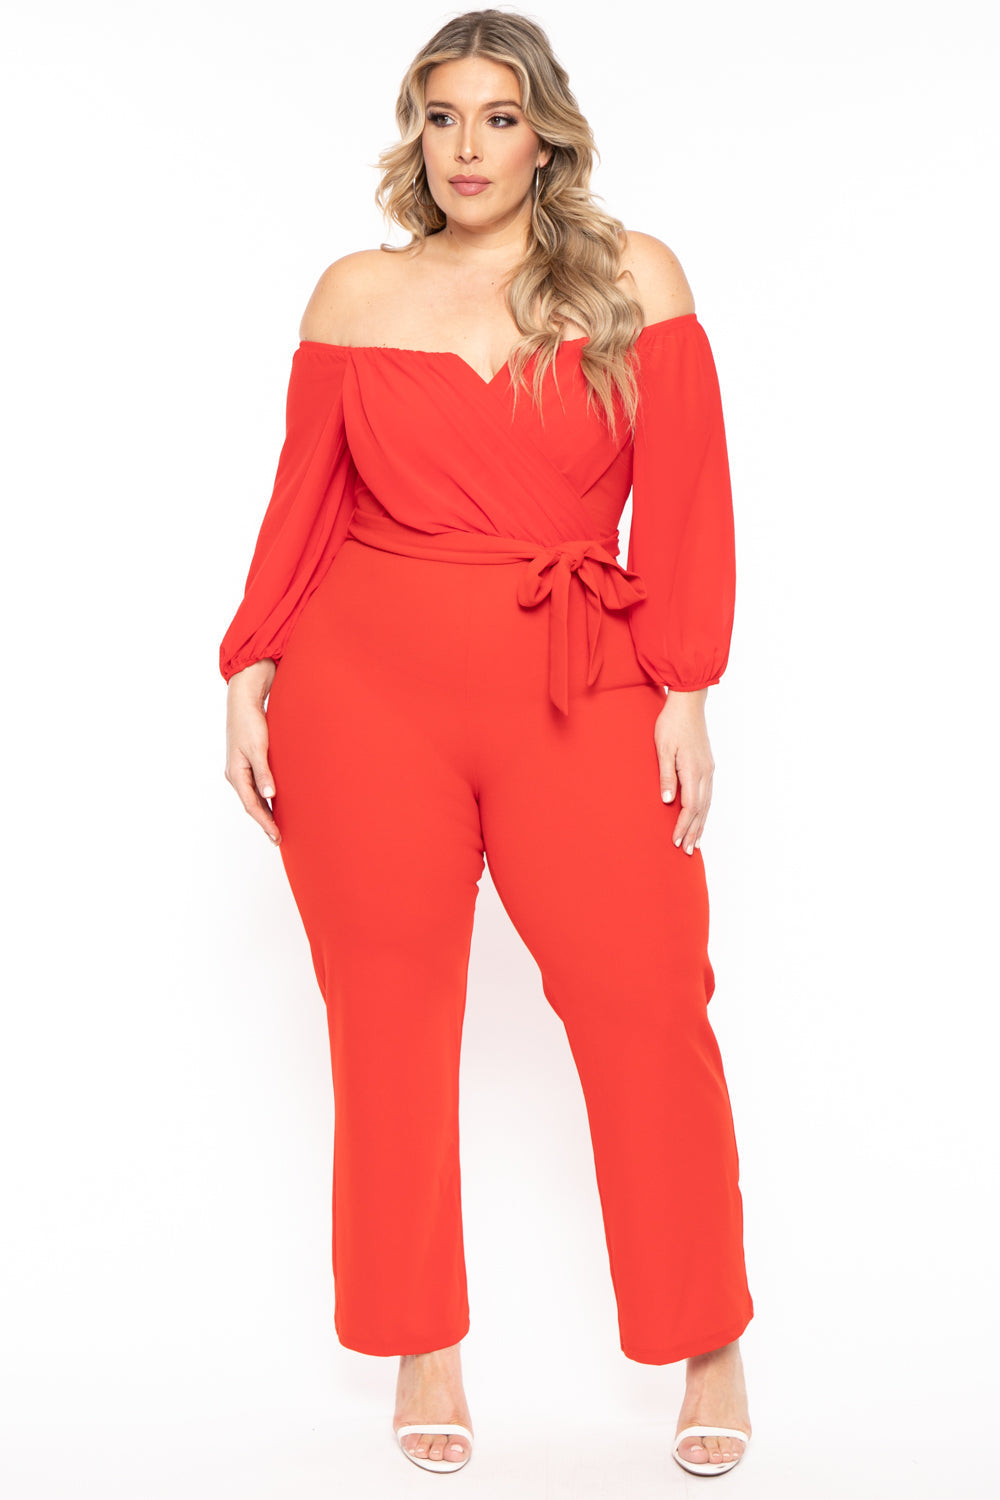 Find Me Jumpsuits and Rompers 1X / Red Plus Size Aryana Cross Over Jumpsuit - Red